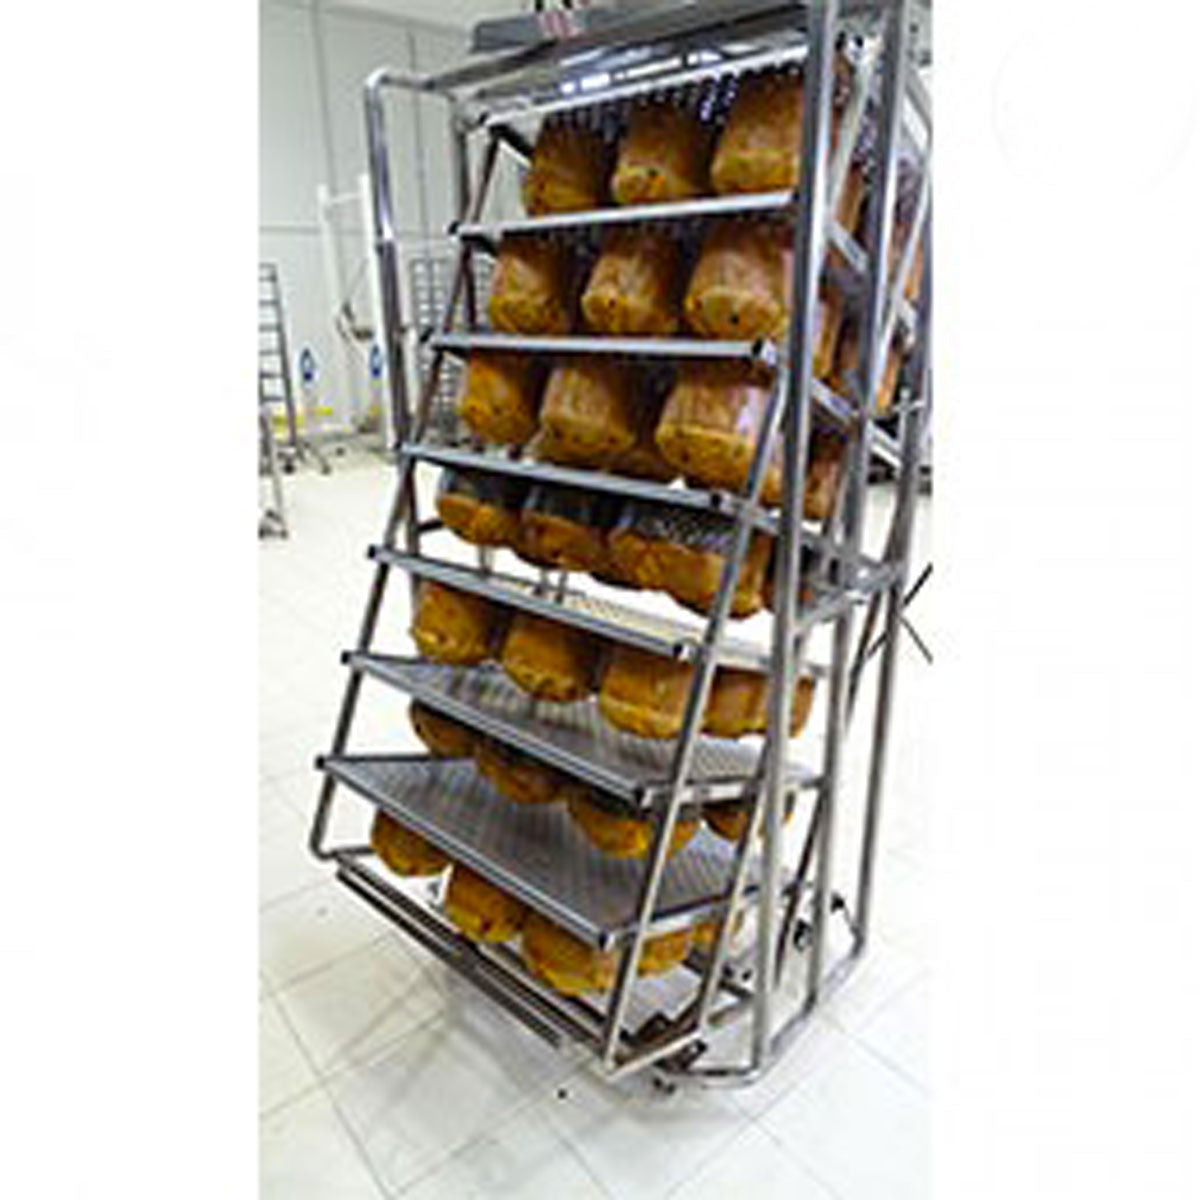 Turn Panettone and Colombe